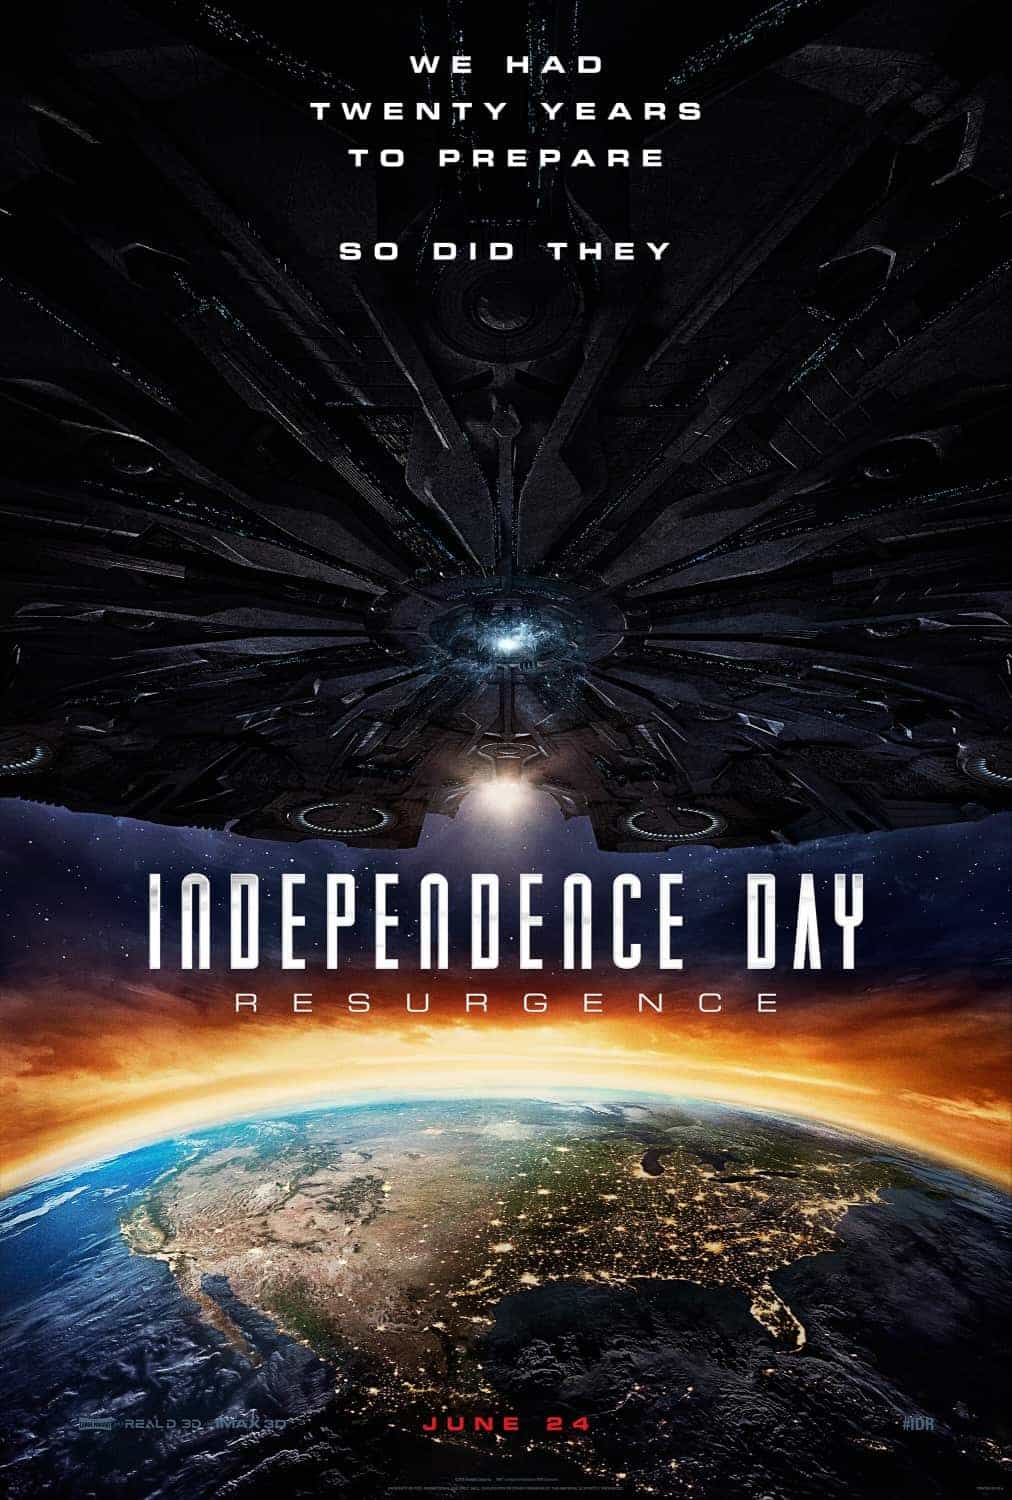 Director Roland Emmerich reveals title of new sequel as Independence Day Resurgence, film release date June 24th 2016